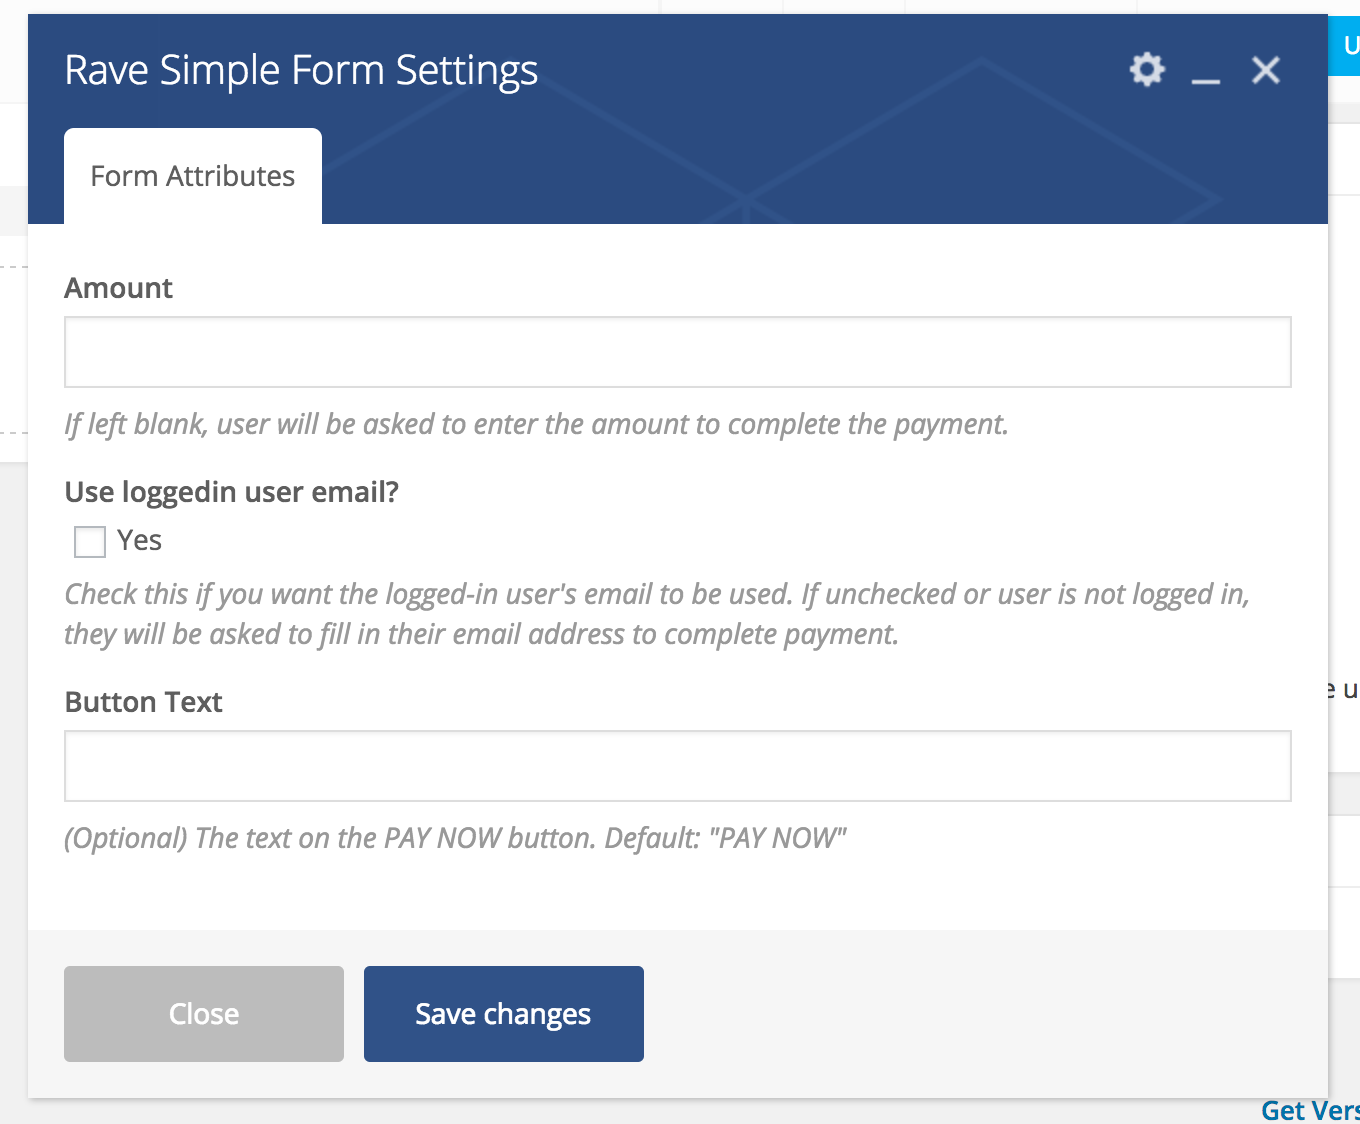 On the "Form Settings" dialog, fill in the form attributes and click "Save Changes".